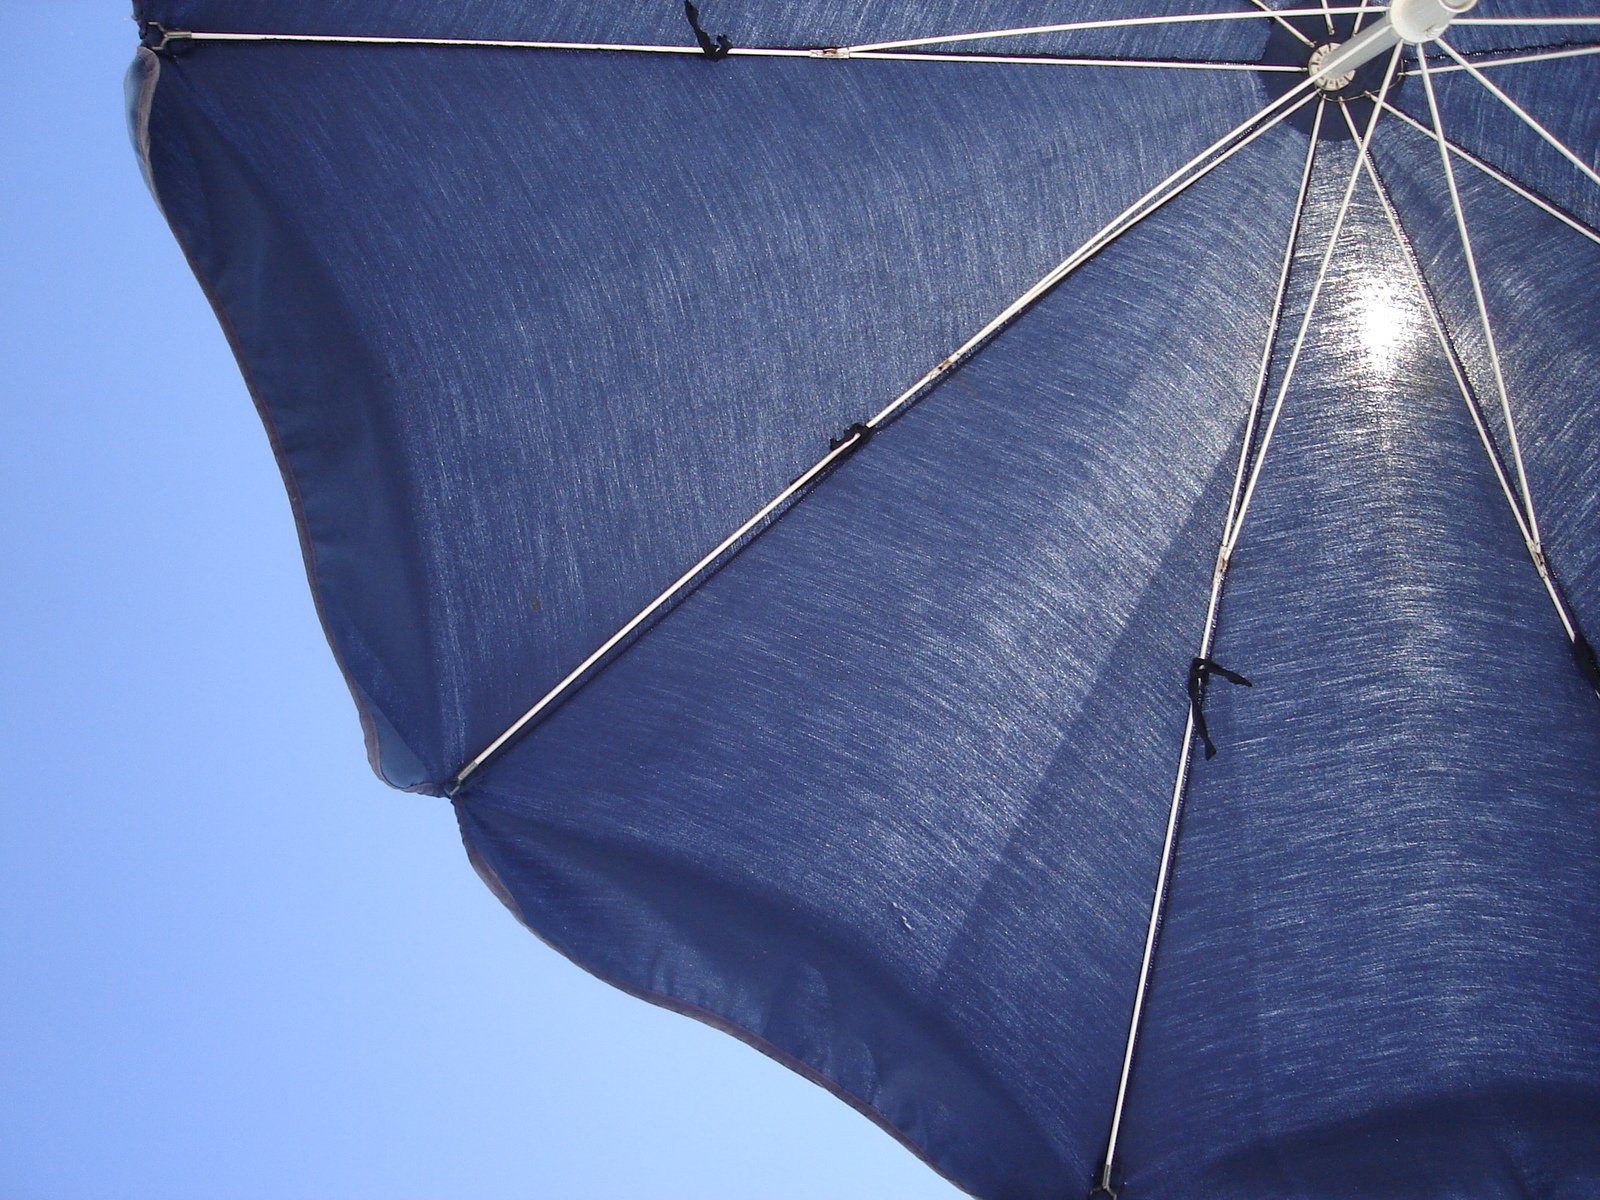 a blue umbrella is opened against a bright blue sky